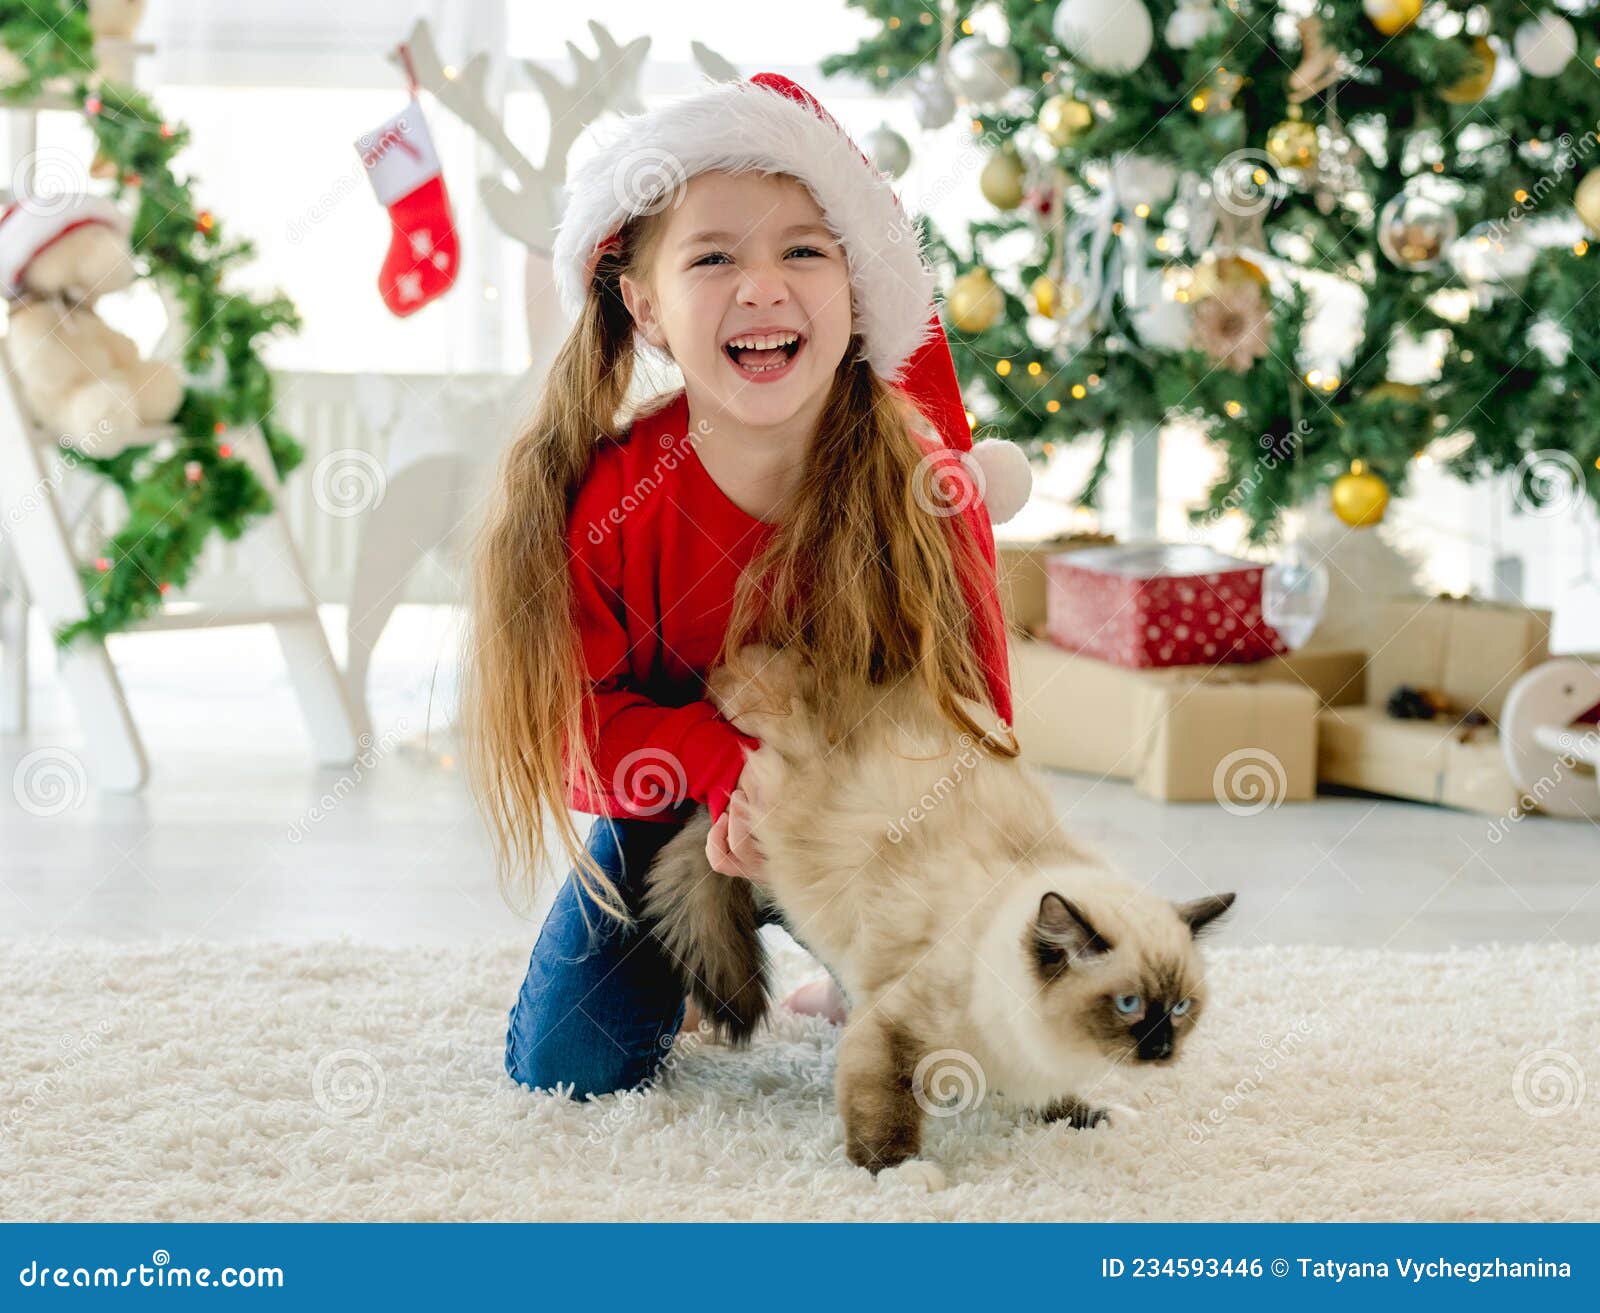 Child with Ragdoll Cat in Christmas Time Stock Photo - Image of ...